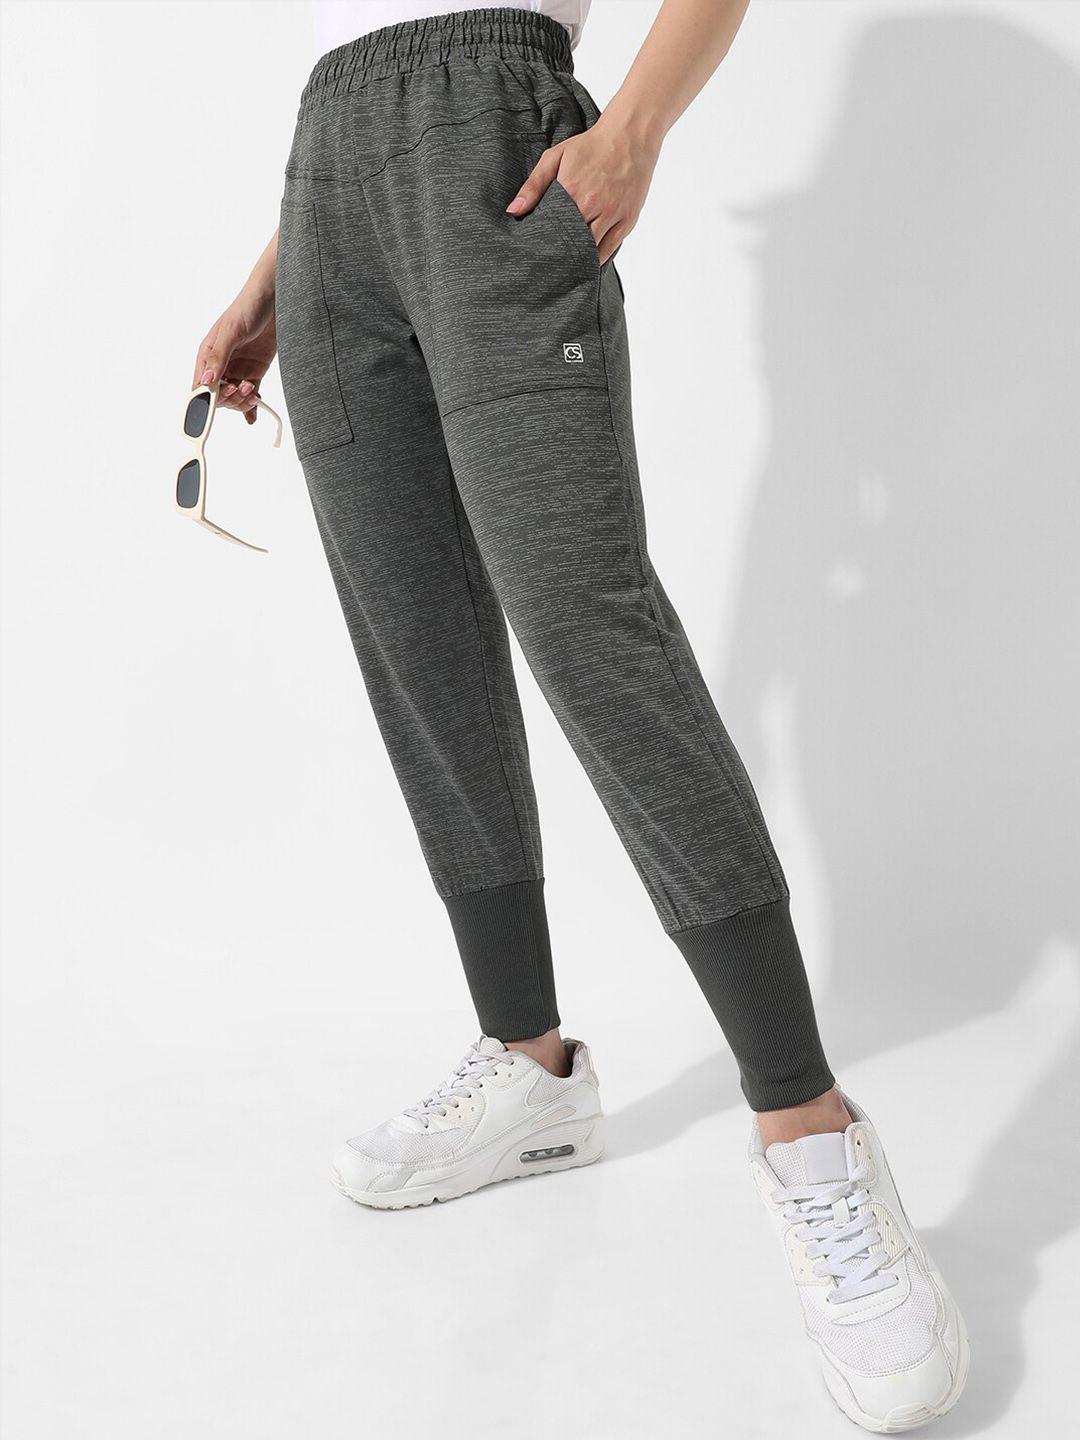 campus-sutra-grey-cotton-track-pants